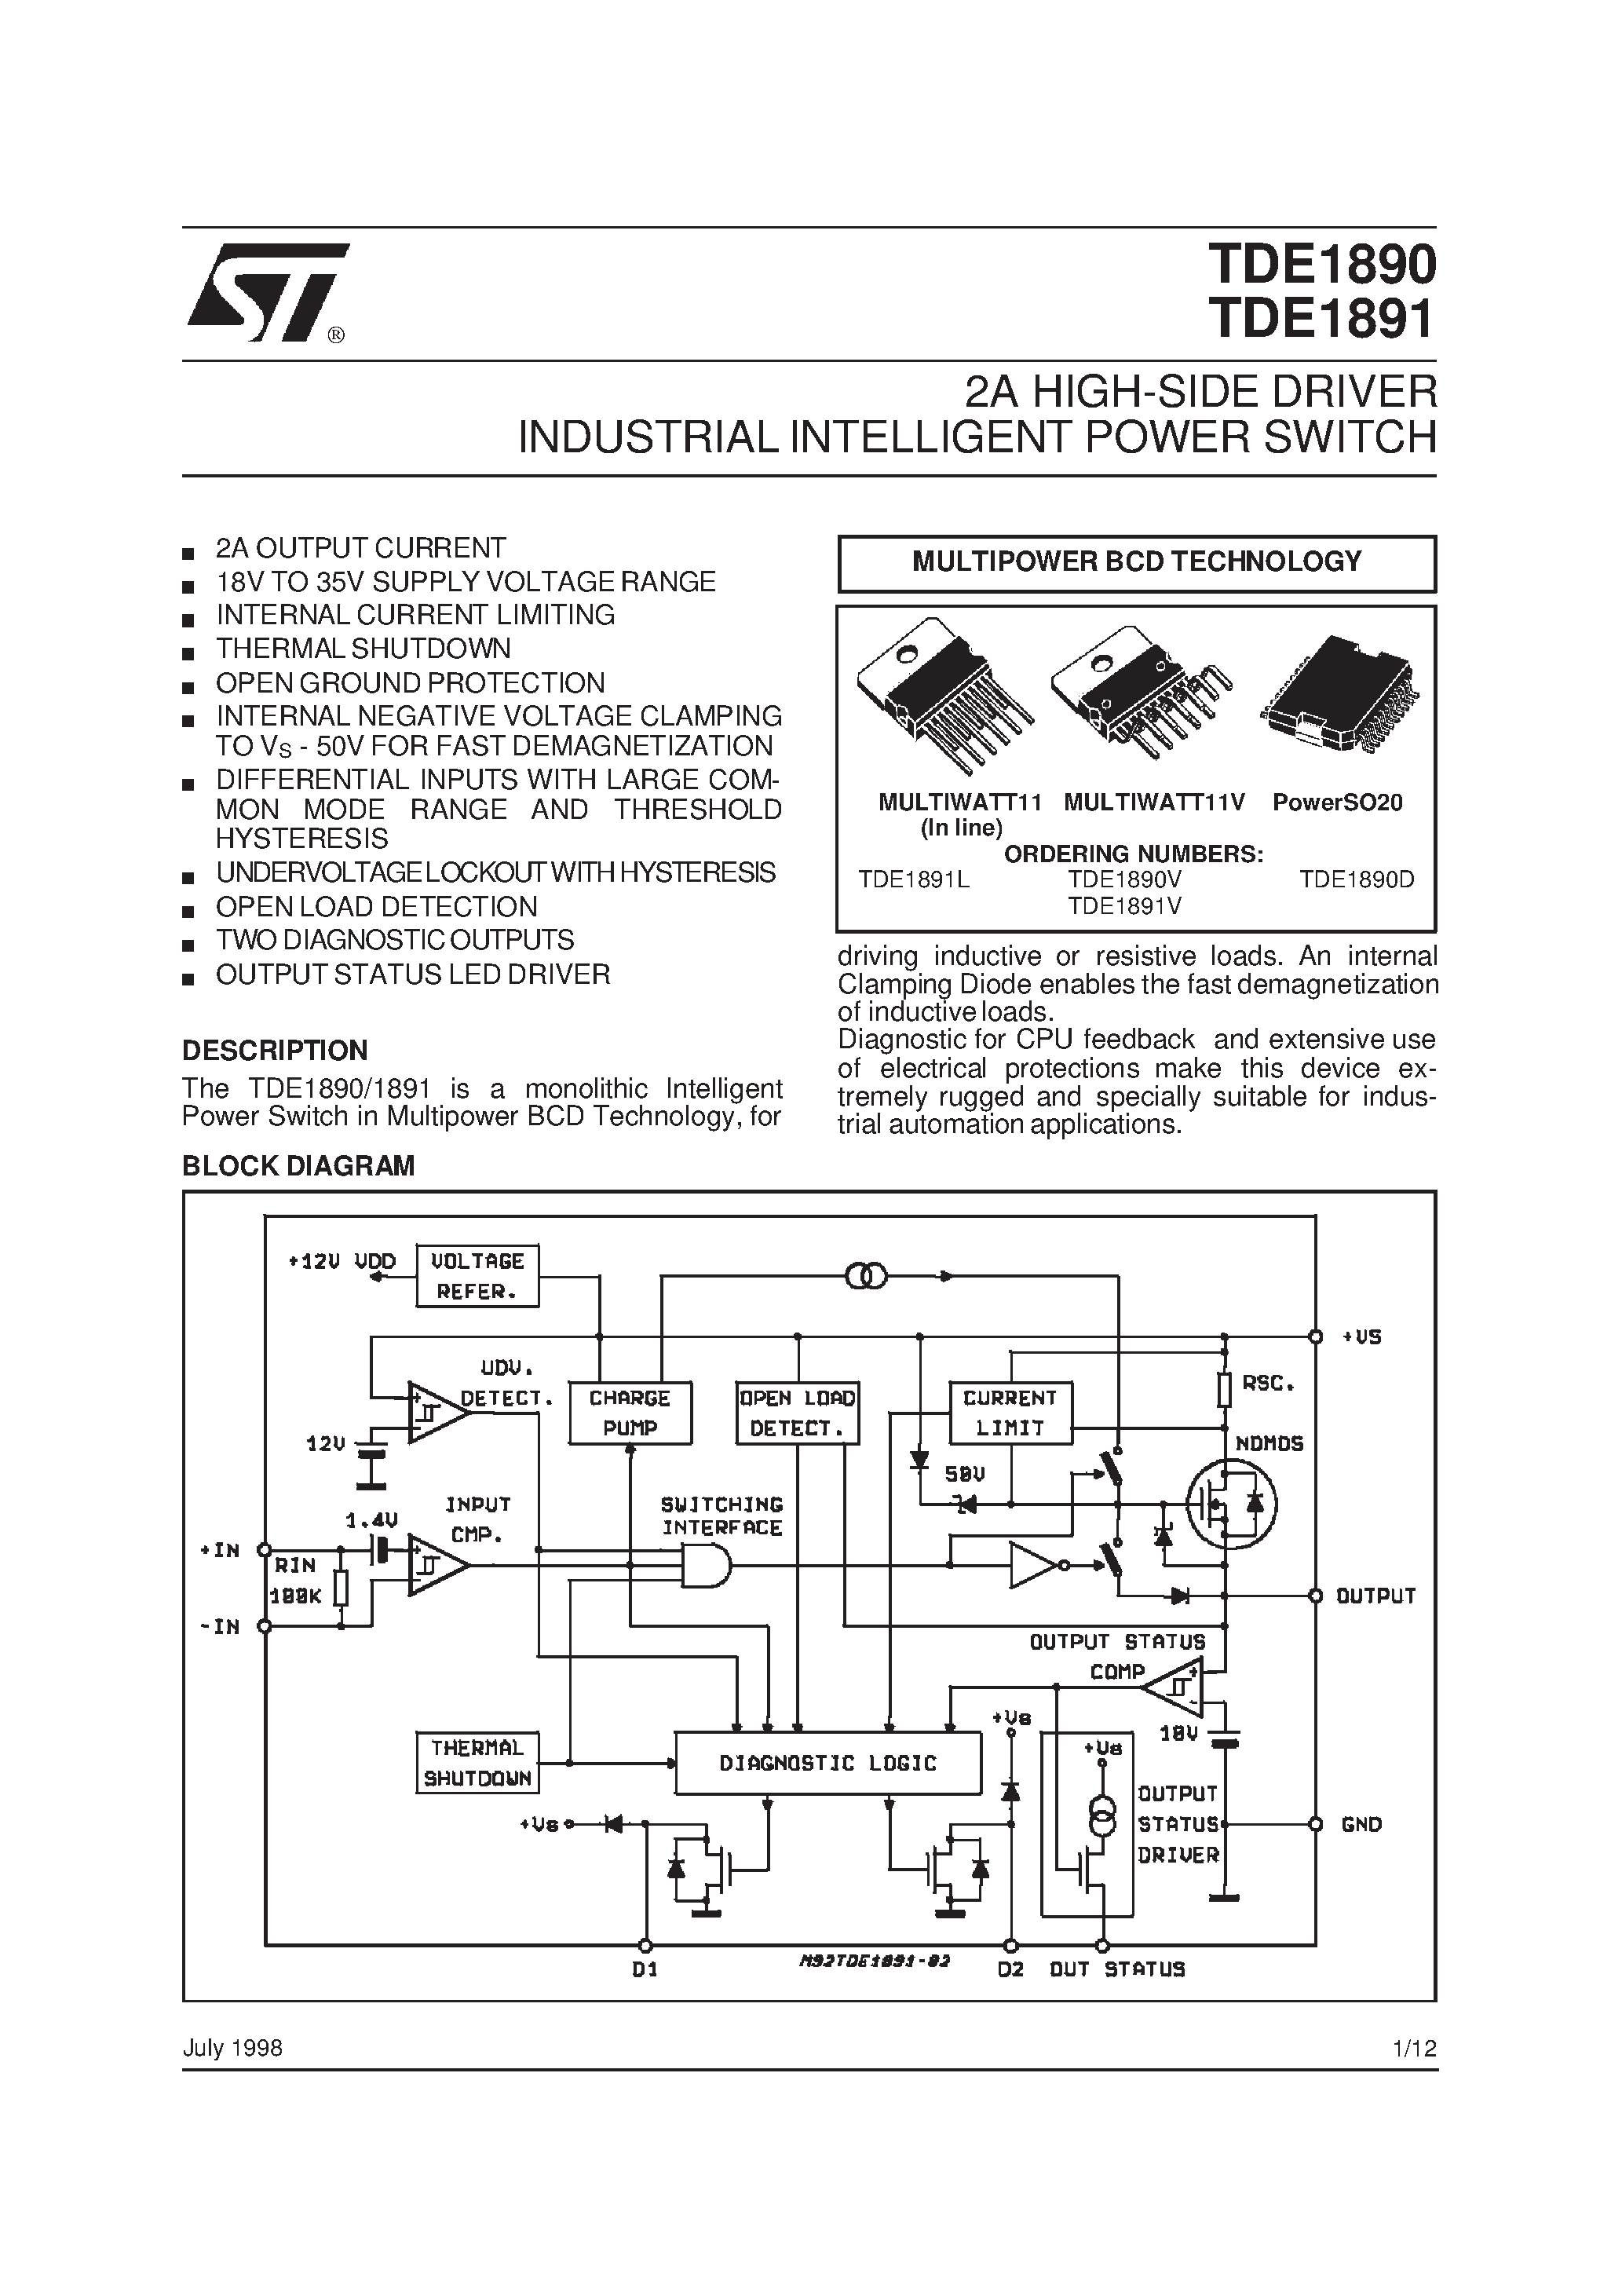 Datasheet TDE1891L - 2A HIGH-SIDE DRIVER INDUSTRIAL INTELLIGENT POWER SWITCH page 1